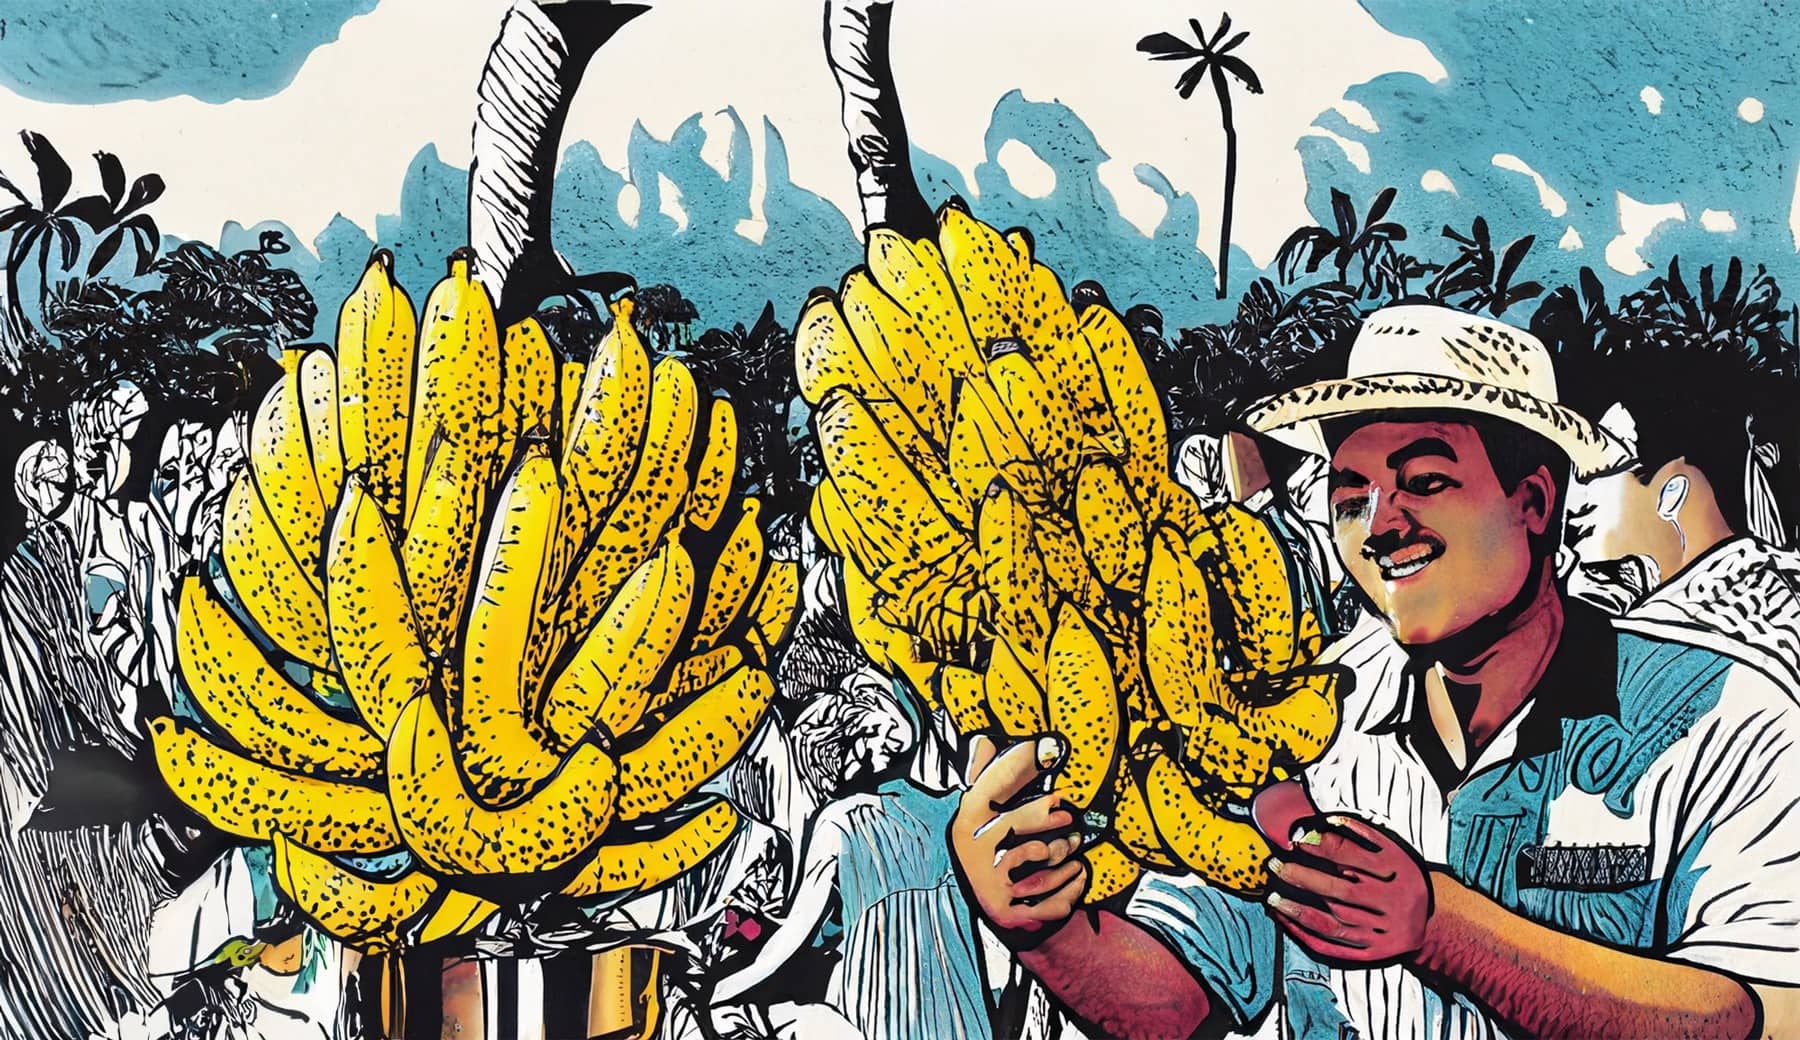 Illustration of a man selling banana bunches